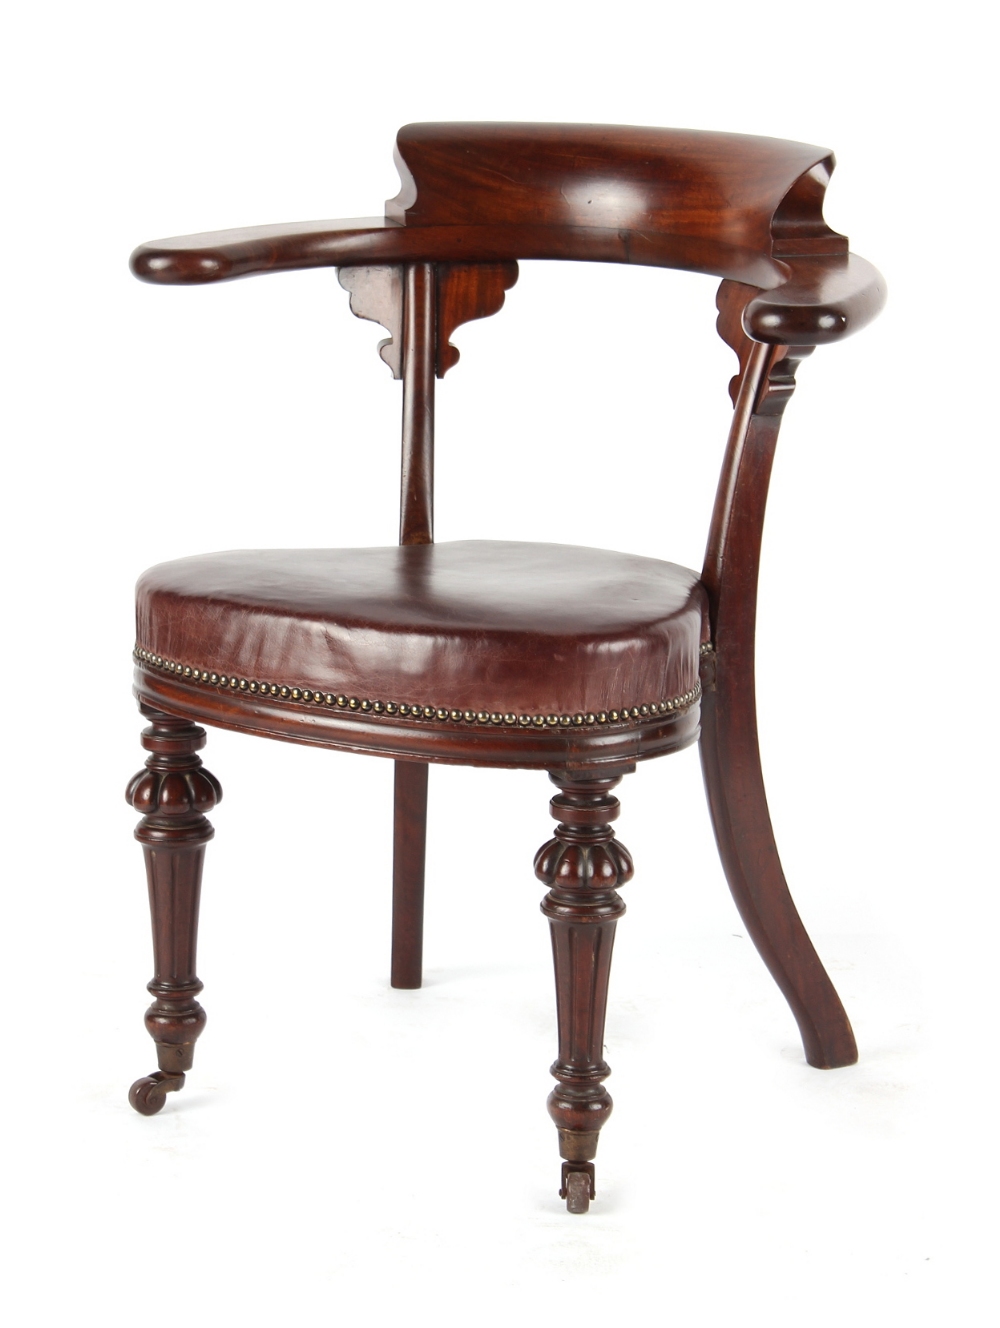 A Victorian mahogany desk chair, with yoke shaped back & turned front legs terminating in castors (